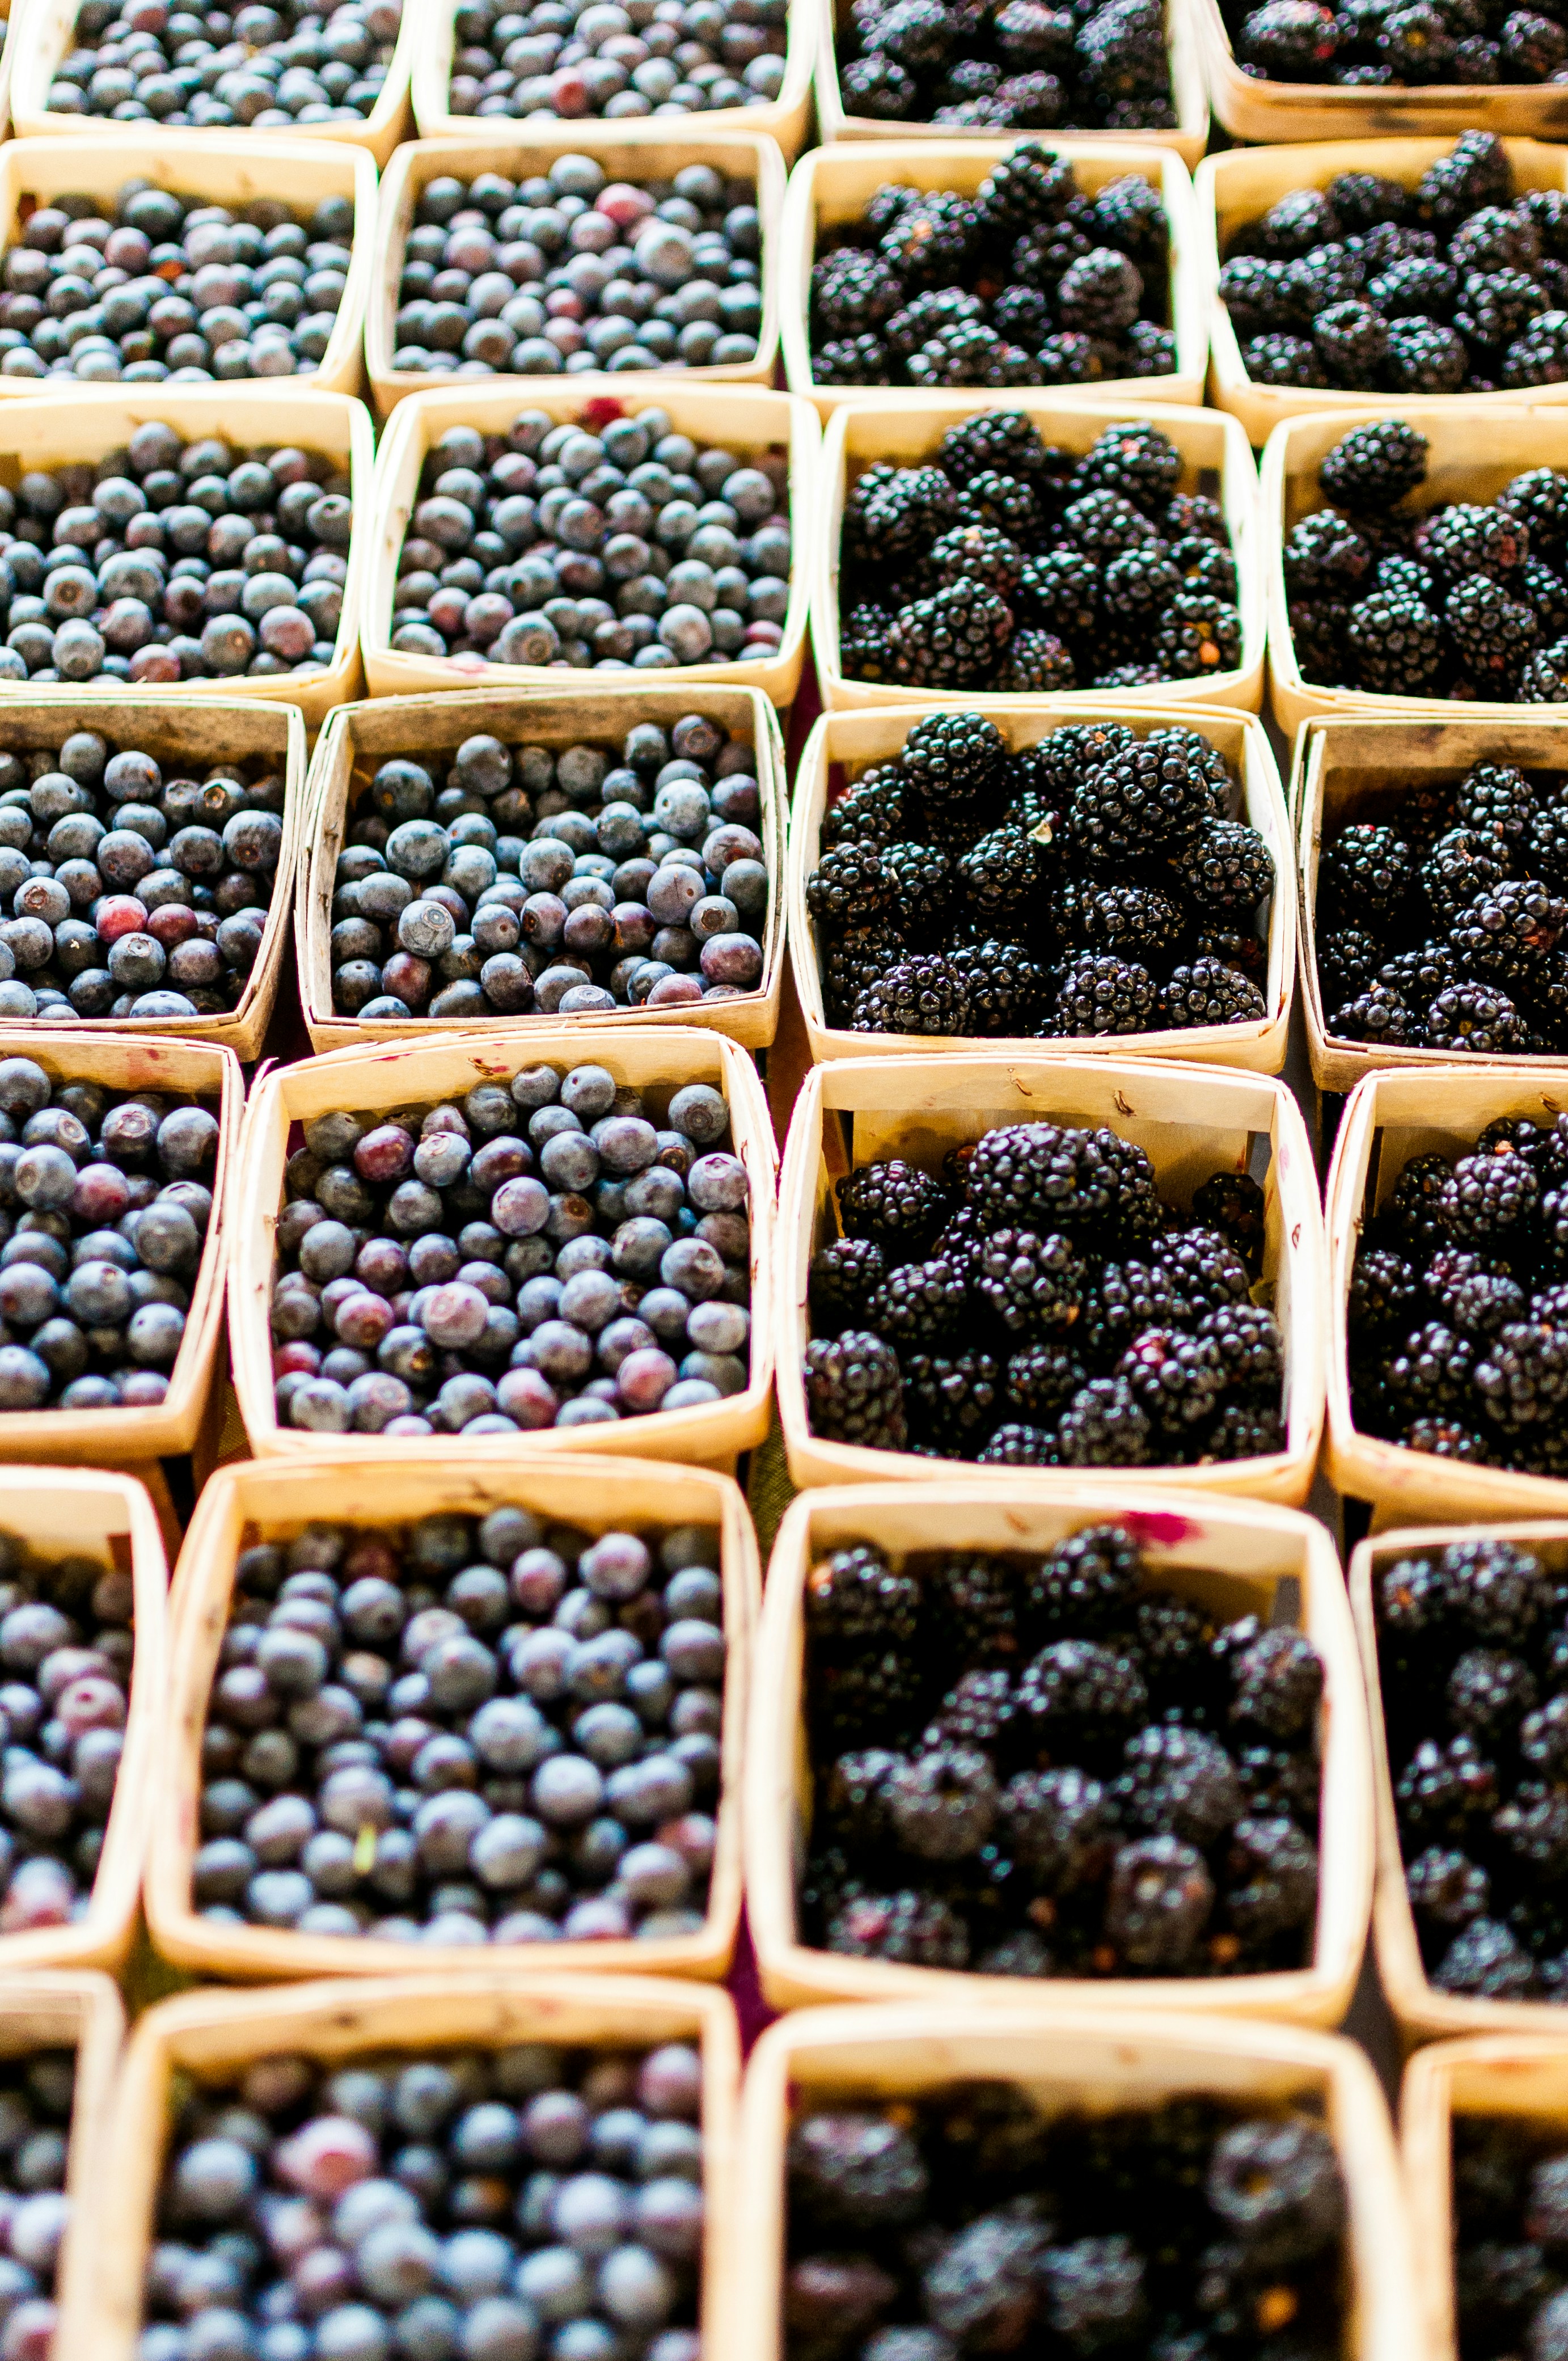 Baskets of berries-blue and black to be exact-from the local farmer's market in Johnson City, Tennessee!